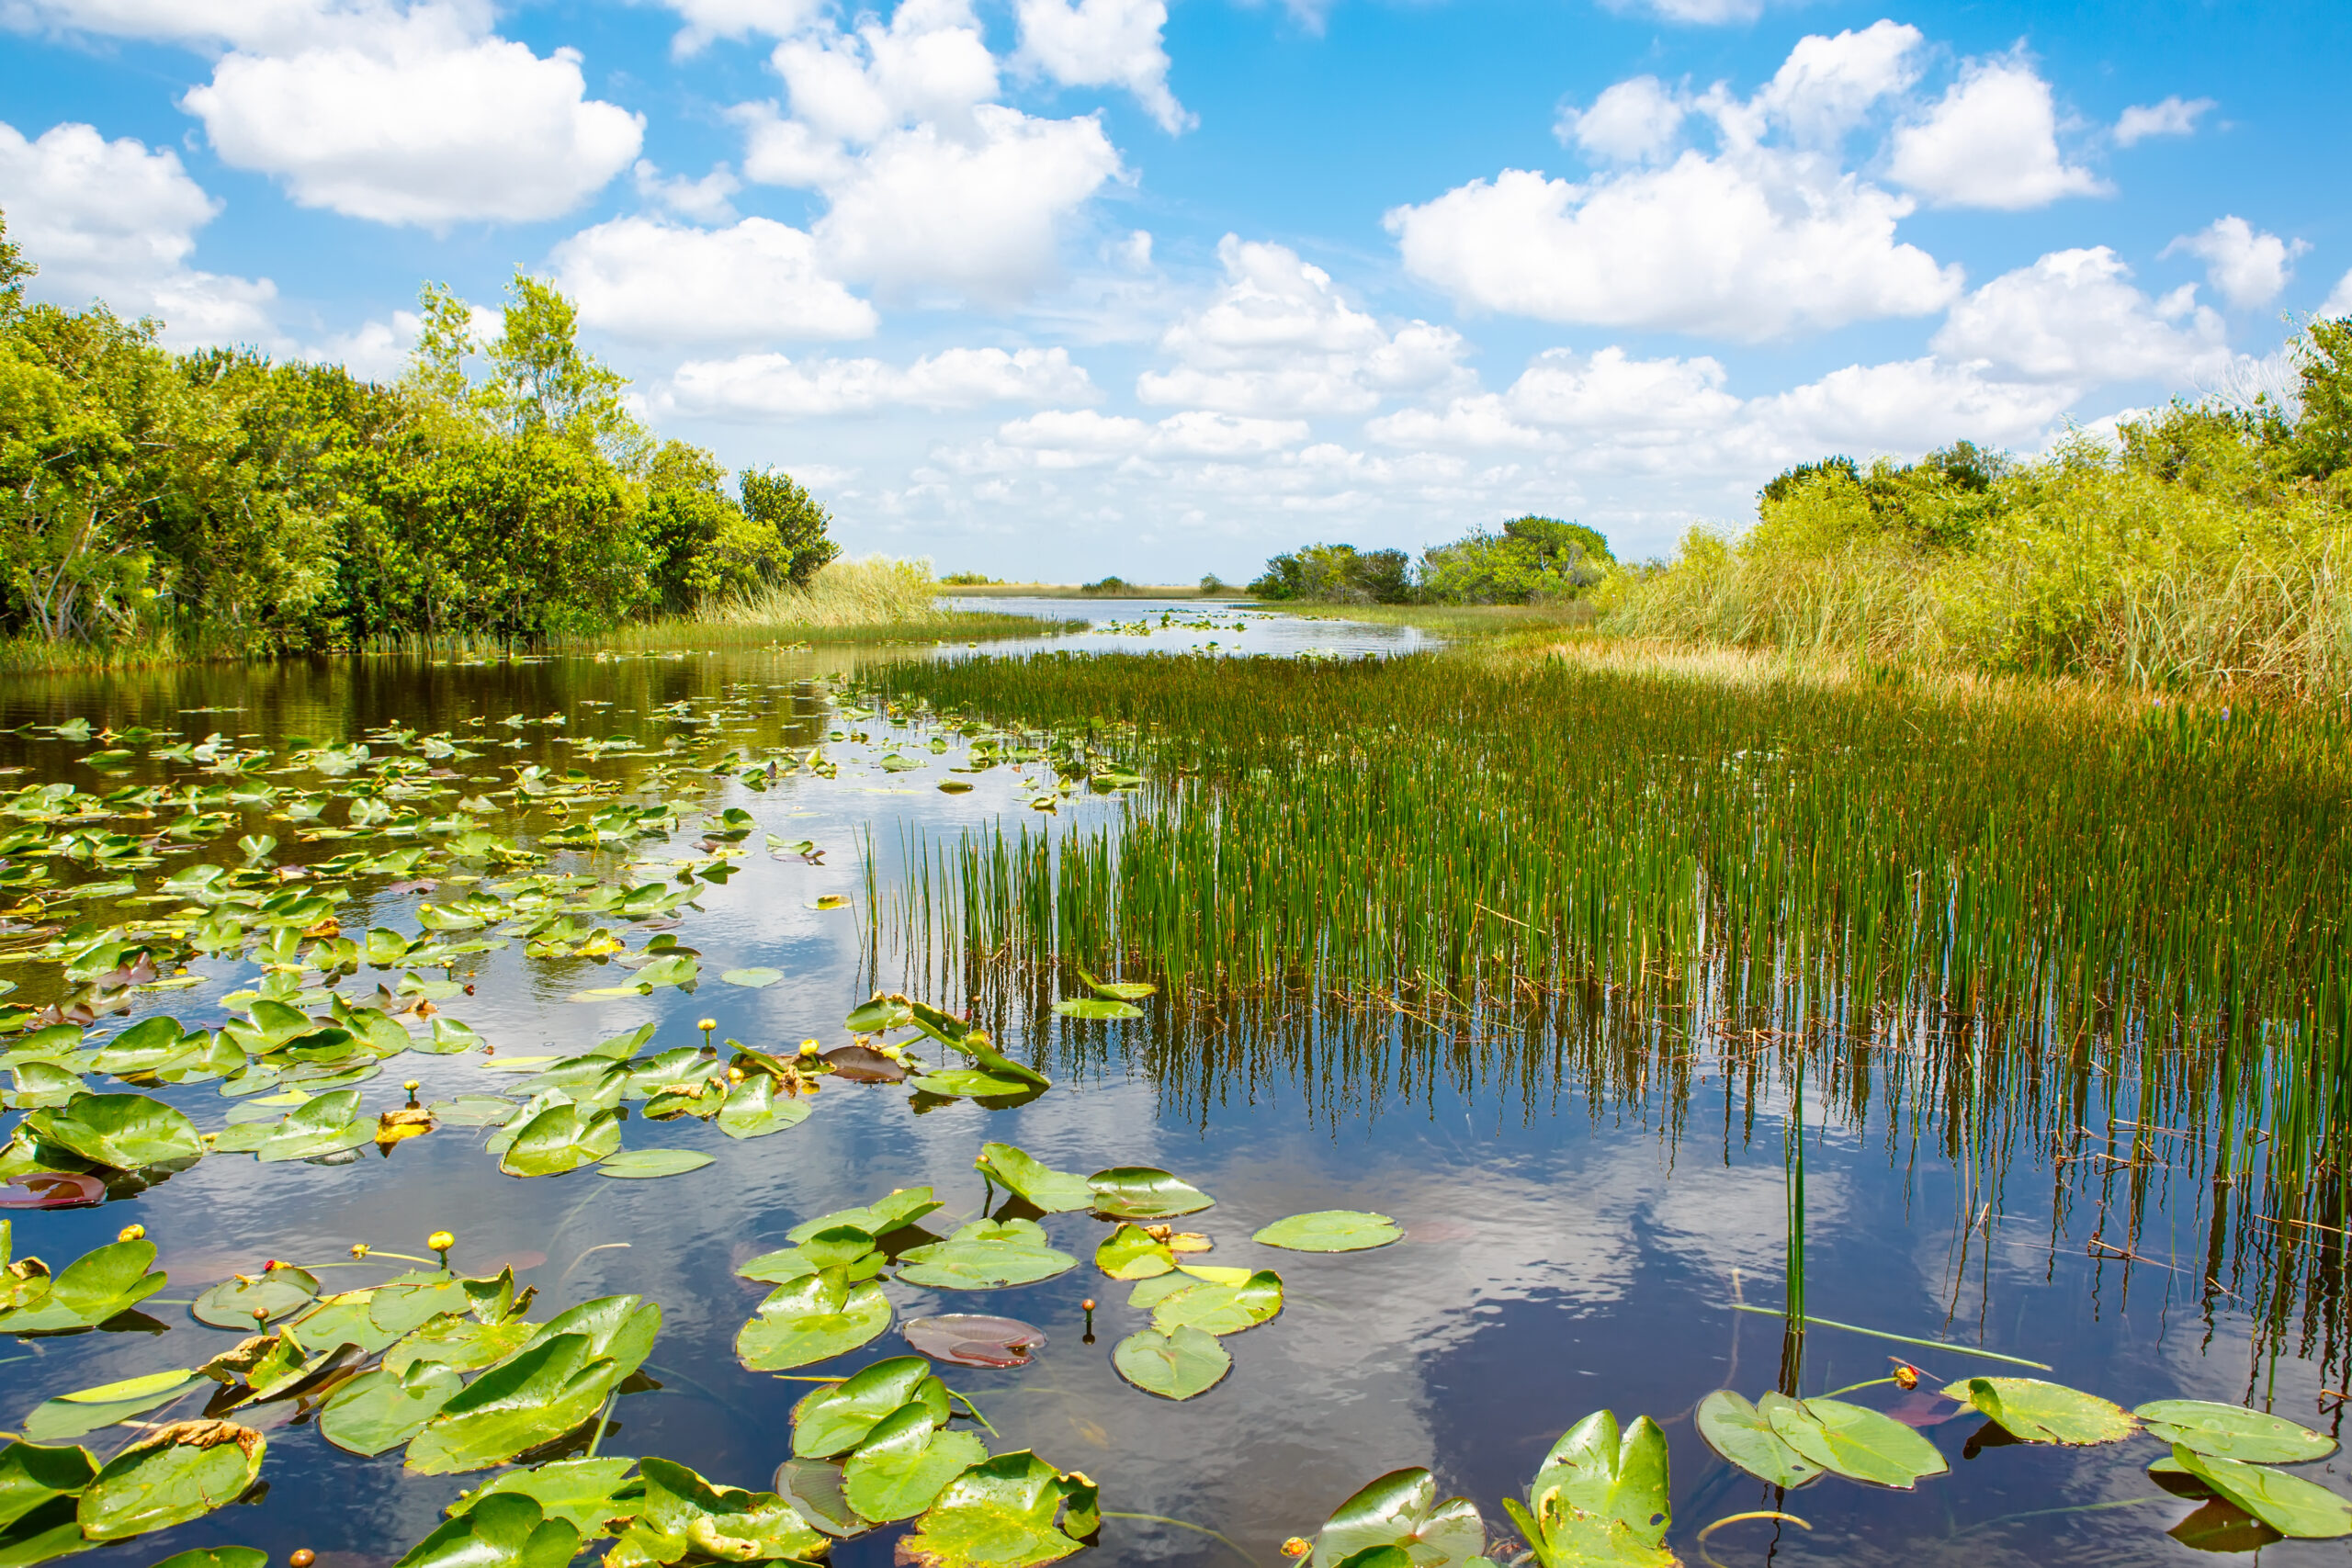 Florida wetland, Airboat ride at Everglades National Park, via Getty Images